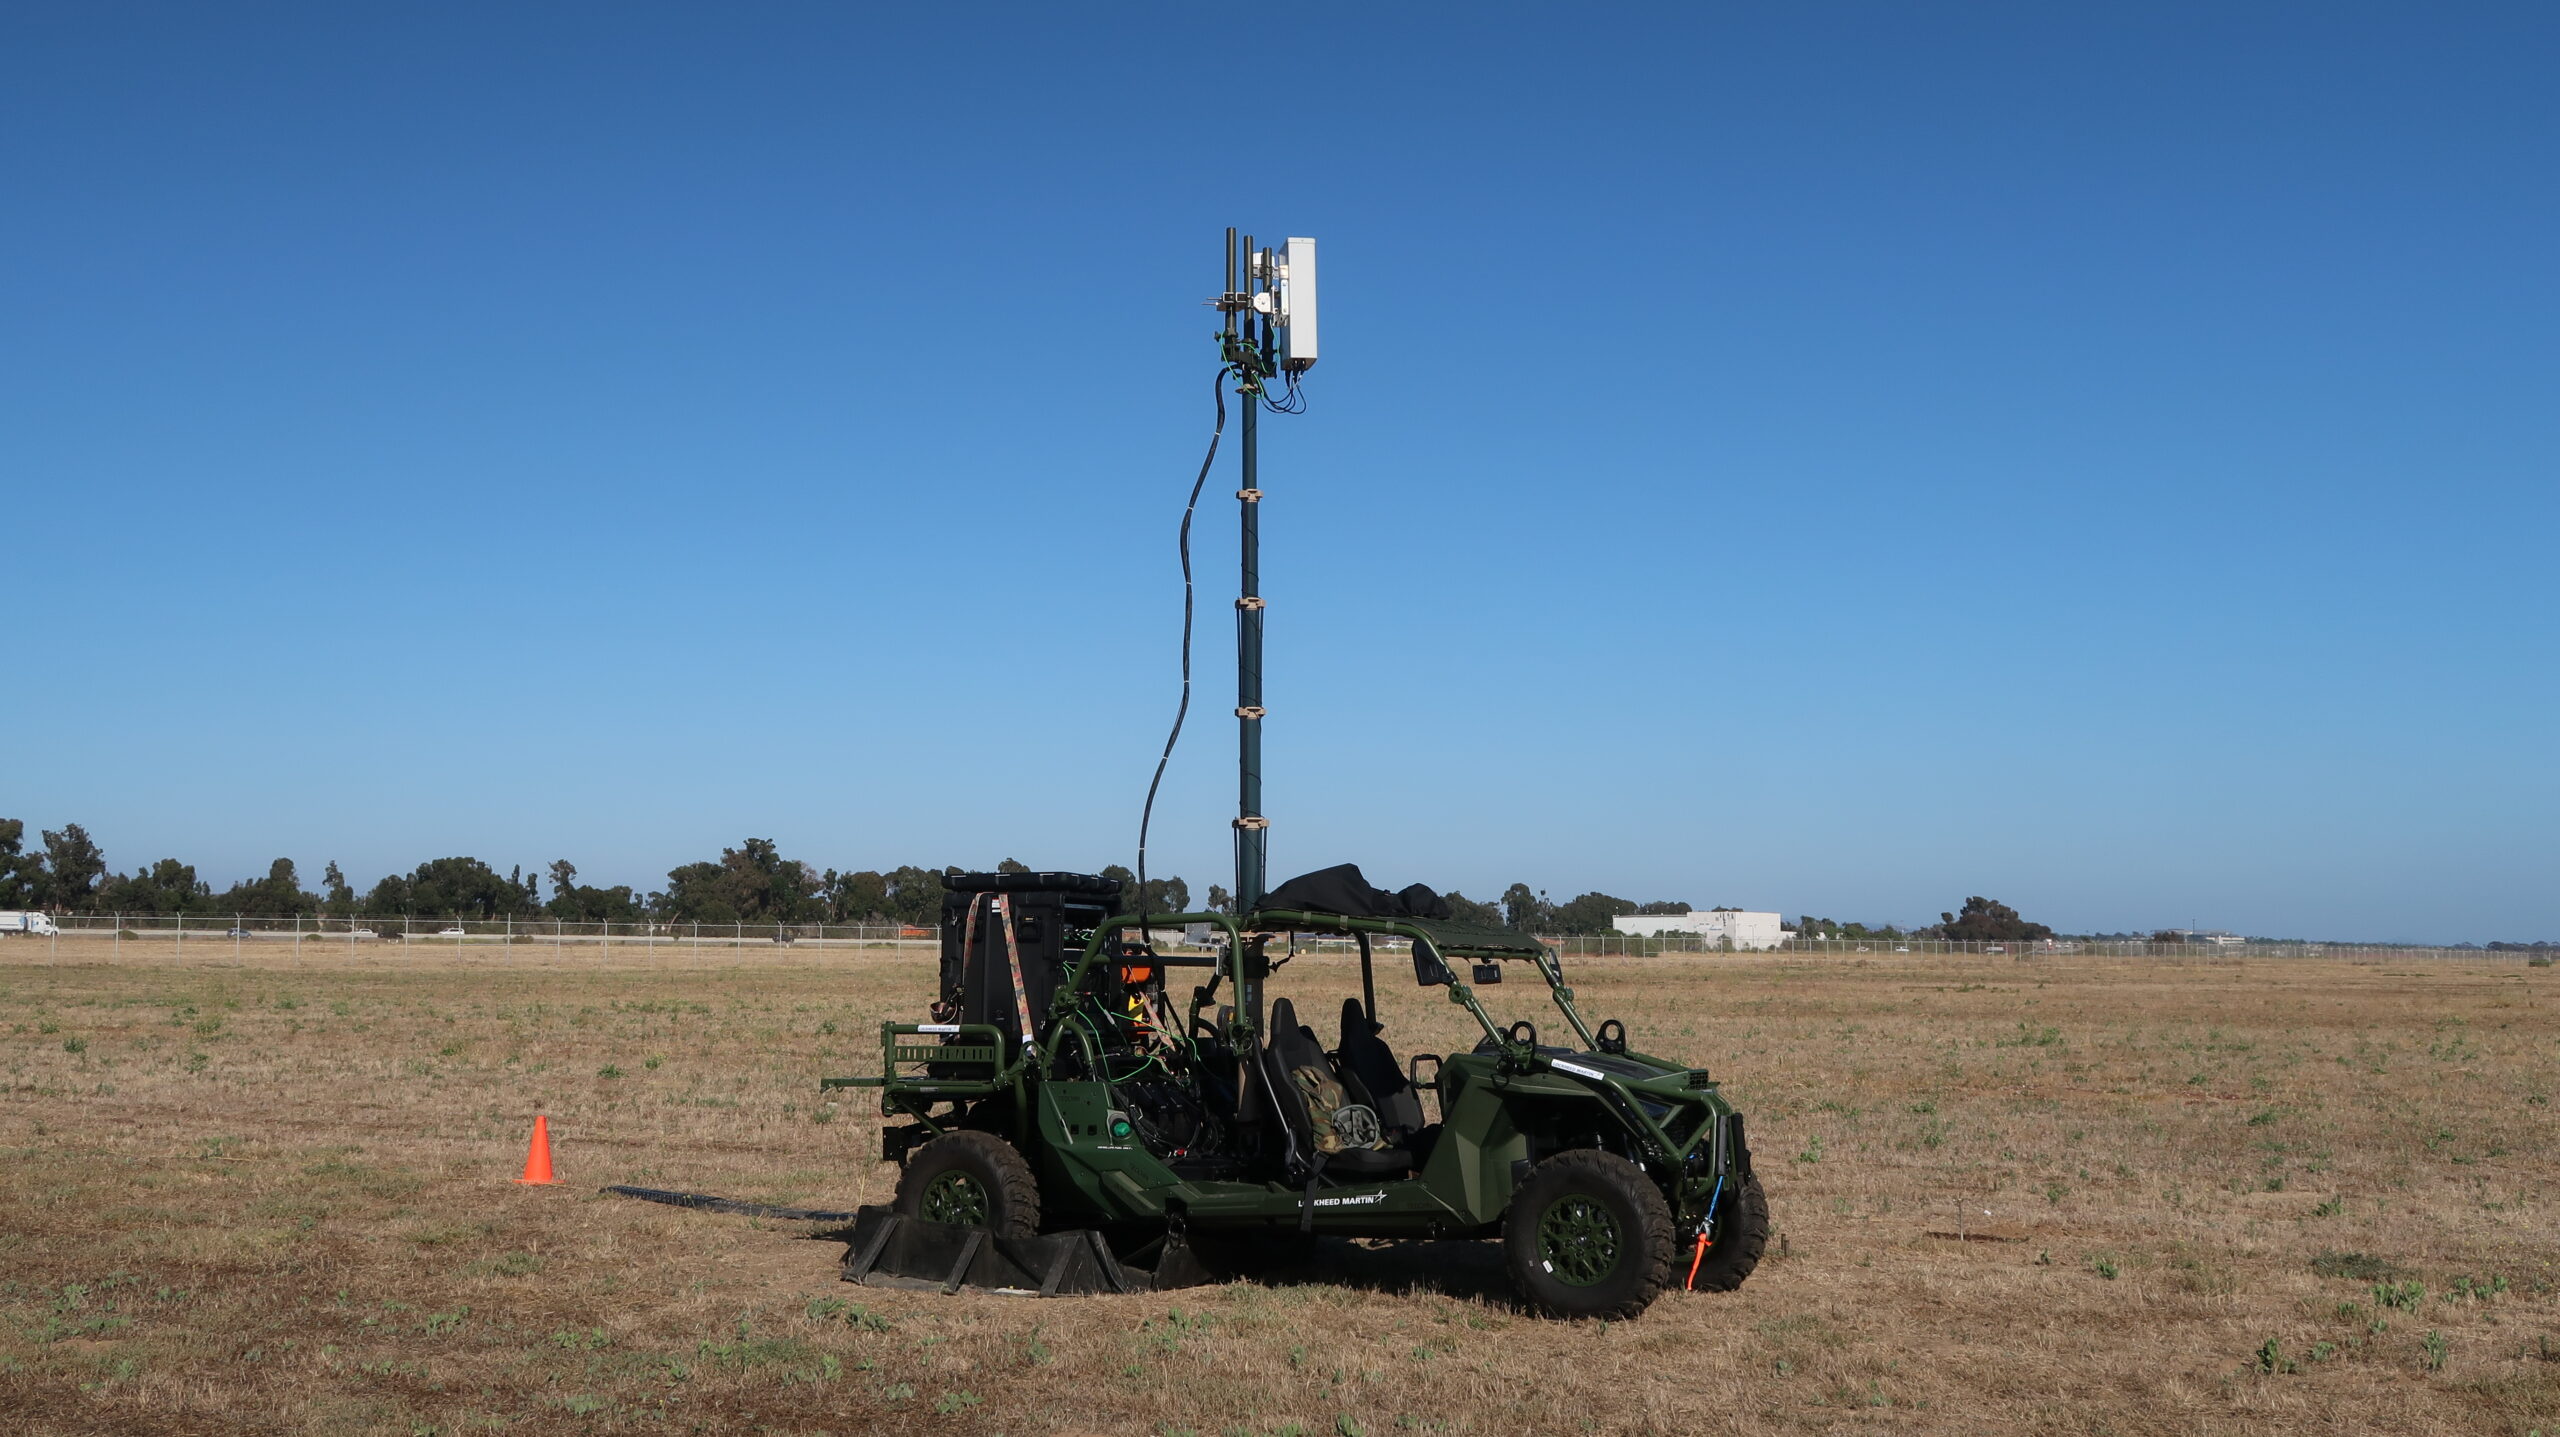 Marines to experiment with Lockheed’s new 5G testbed in second phase of OSIRIS program